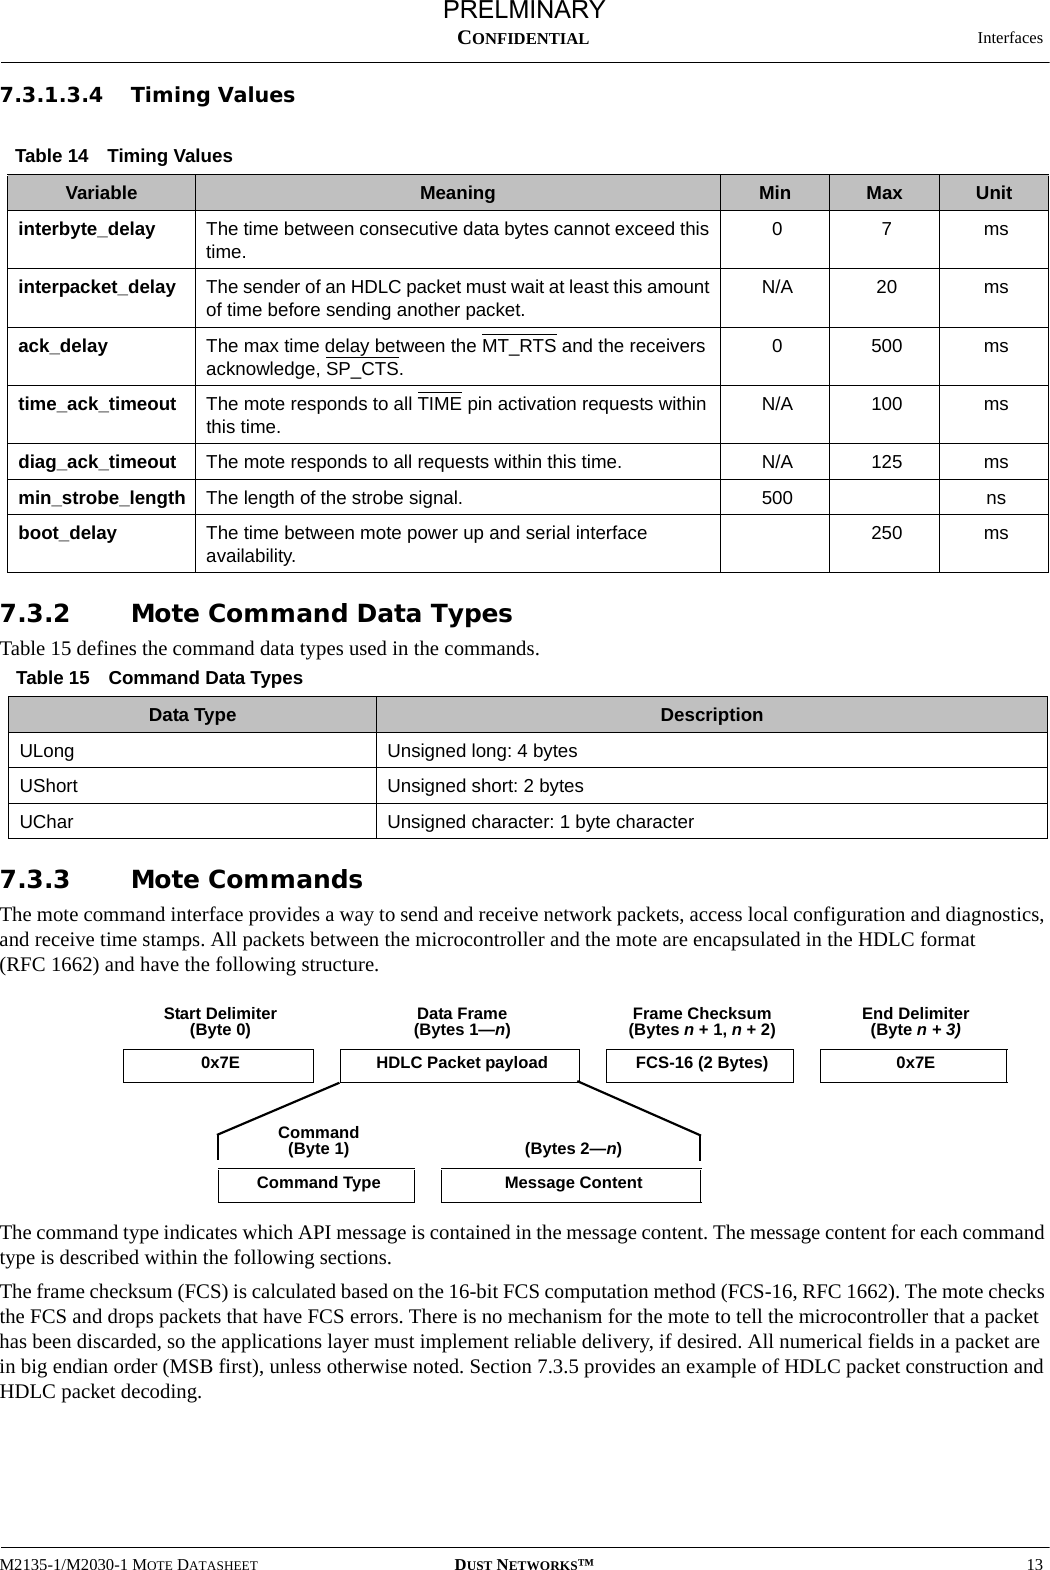   InterfacesM2135-1/M2030-1 MOTE DATASHEET DUST NETWORKS™13CONFIDENTIAL7.3.1.3.4 Timing Values7.3.2 Mote Command Data TypesTable 15 defines the command data types used in the commands.7.3.3 Mote CommandsThe mote command interface provides a way to send and receive network packets, access local configuration and diagnostics, and receive time stamps. All packets between the microcontroller and the mote are encapsulated in the HDLC format (RFC 1662) and have the following structure. The command type indicates which API message is contained in the message content. The message content for each command type is described within the following sections.The frame checksum (FCS) is calculated based on the 16-bit FCS computation method (FCS-16, RFC 1662). The mote checks the FCS and drops packets that have FCS errors. There is no mechanism for the mote to tell the microcontroller that a packet has been discarded, so the applications layer must implement reliable delivery, if desired. All numerical fields in a packet are in big endian order (MSB first), unless otherwise noted. Section 7.3.5 provides an example of HDLC packet construction and HDLC packet decoding.Table 14 Timing ValuesVariable Meaning Min Max Unitinterbyte_delay The time between consecutive data bytes cannot exceed this time.0 7 msinterpacket_delay The sender of an HDLC packet must wait at least this amount of time before sending another packet.N/A 20 msack_delay The max time delay between the MT_RTS and the receivers acknowledge, SP_CTS. 0500 mstime_ack_timeout The mote responds to all TIME pin activation requests within this time.N/A 100 msdiag_ack_timeout The mote responds to all requests within this time. N/A 125 msmin_strobe_length The length of the strobe signal. 500 nsboot_delay The time between mote power up and serial interface availability.250 msTable 15 Command Data TypesData Type DescriptionULong Unsigned long: 4 bytesUShort Unsigned short: 2 bytesUChar Unsigned character: 1 byte characterCommand(Byte 1) (Bytes 2—n)Command Type Message ContentStart Delimiter(Byte 0) Data Frame(Bytes 1—n)Frame Checksum (Bytes n + 1, n + 2) End Delimiter(Byte n + 3)0x7E  HDLC Packet payload FCS-16 (2 Bytes) 0x7EPRELMINARY